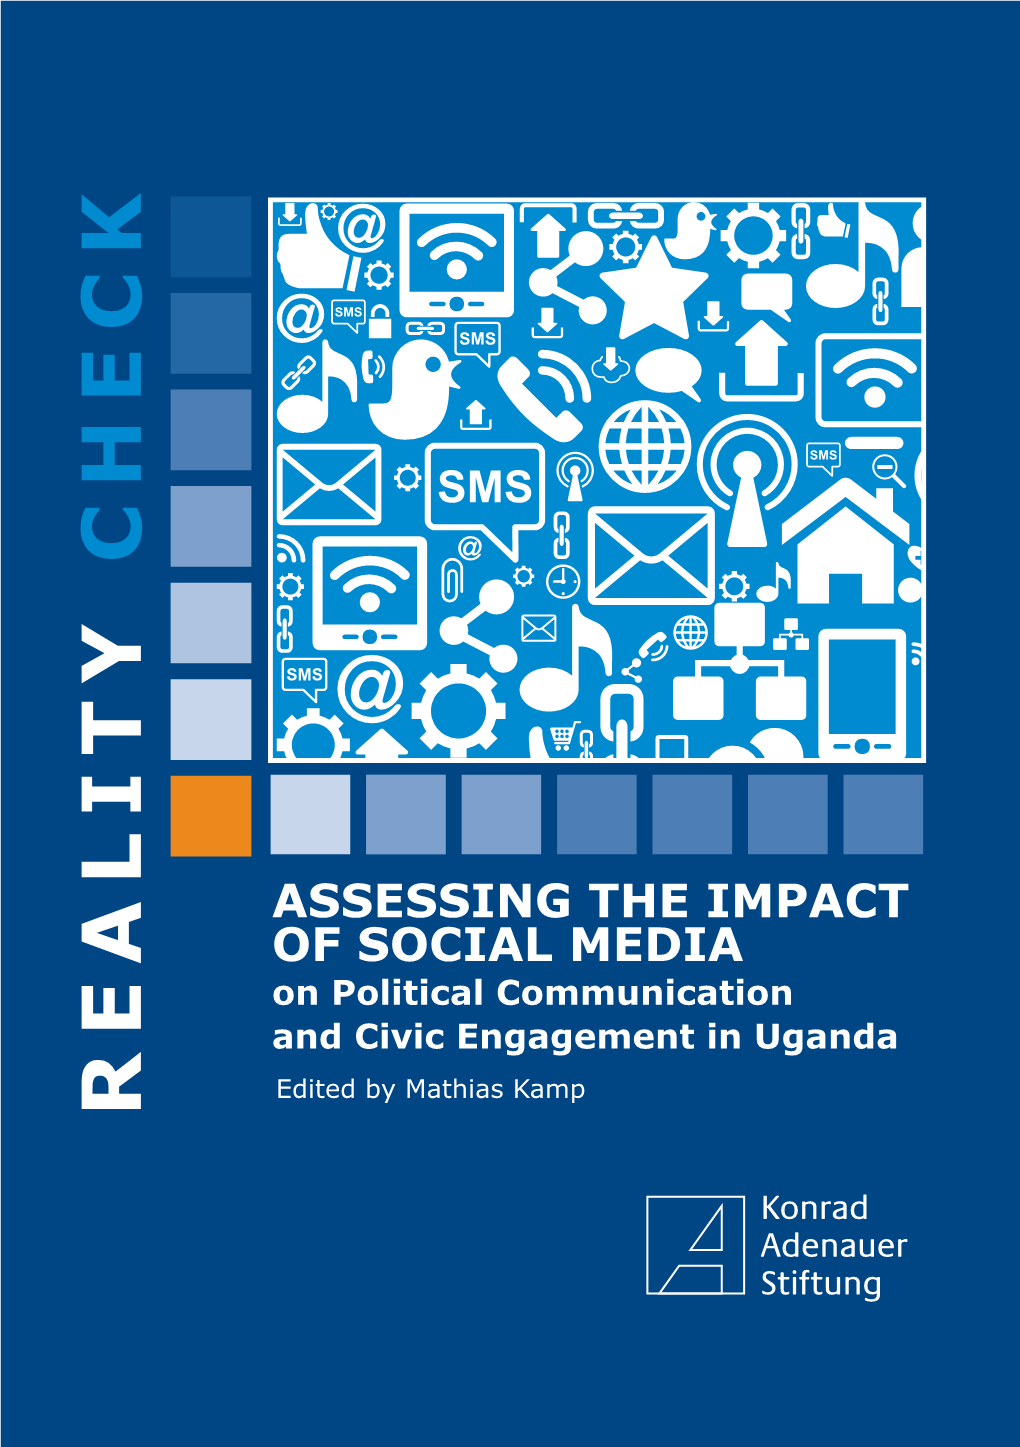 Assessing the Impact of Social Media on Political Communication and Civic Engagement in Uganda